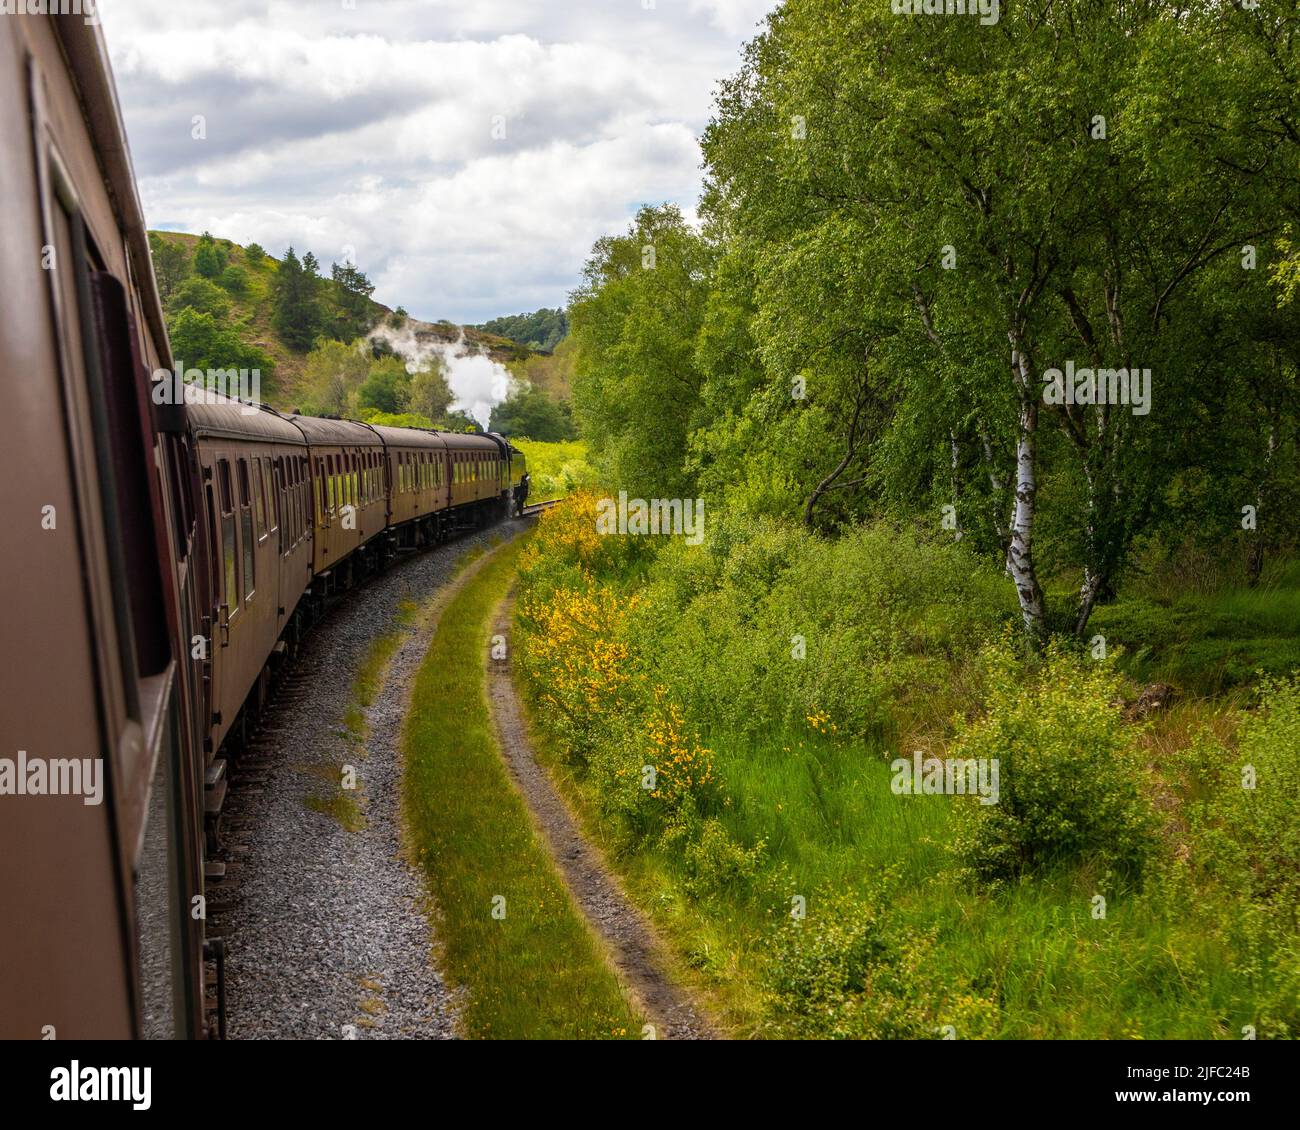 Onboard the magnificent North Yorkshire Moors Railway that runs through the North Yorkshire Moors National Park in the UK. Stock Photo